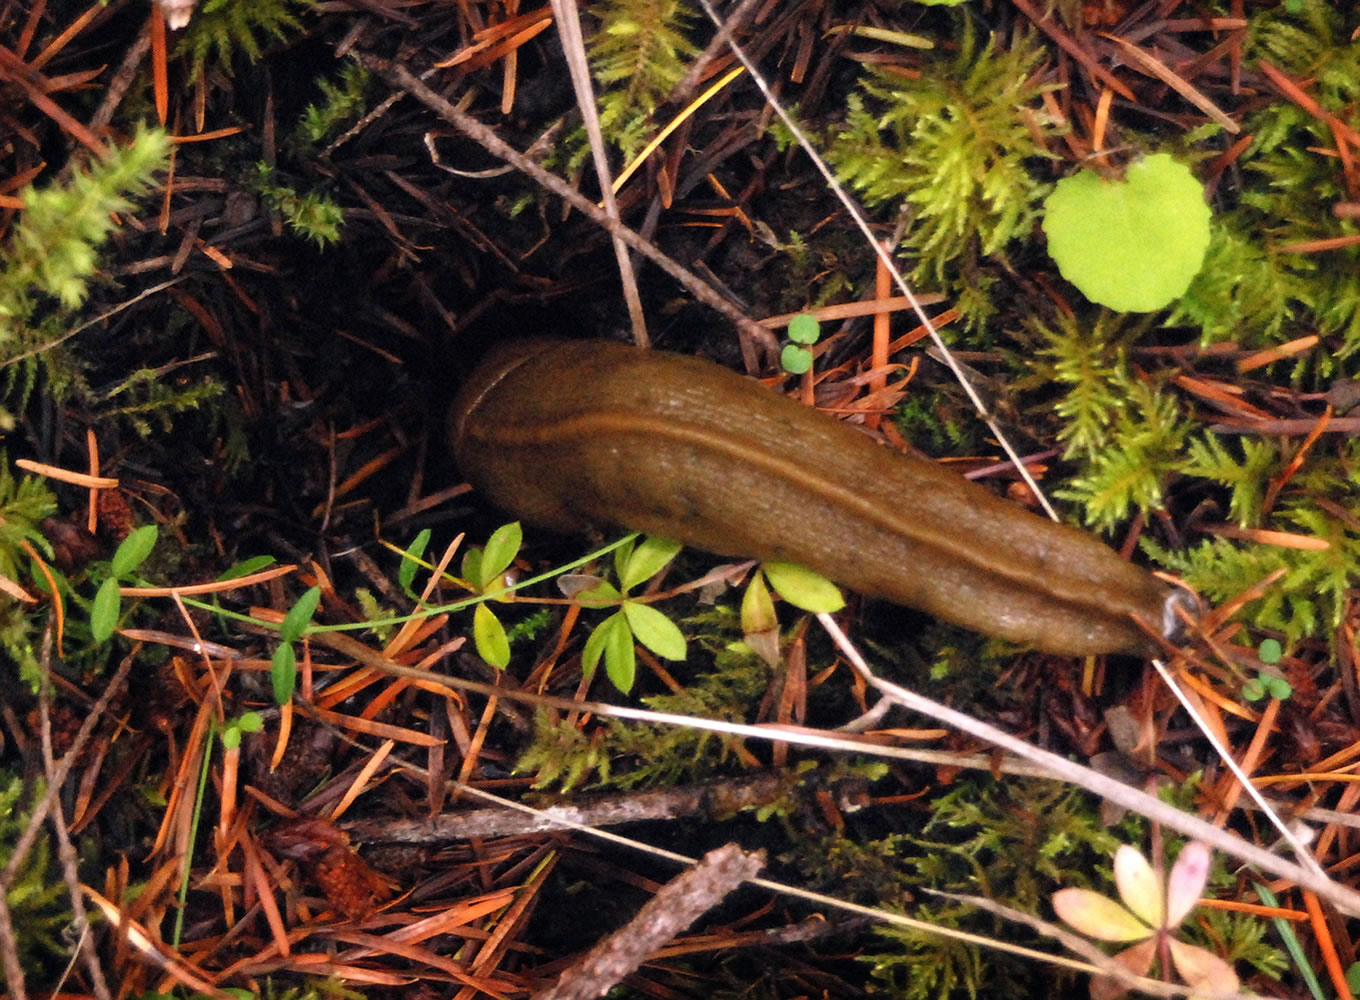 Jeff Barnard /Associated Press files
A 4-inch-long banana slug slithers its way into a hole in November 2009 on the Van Eck Oregon Forest near Burnt Woods, Ore.